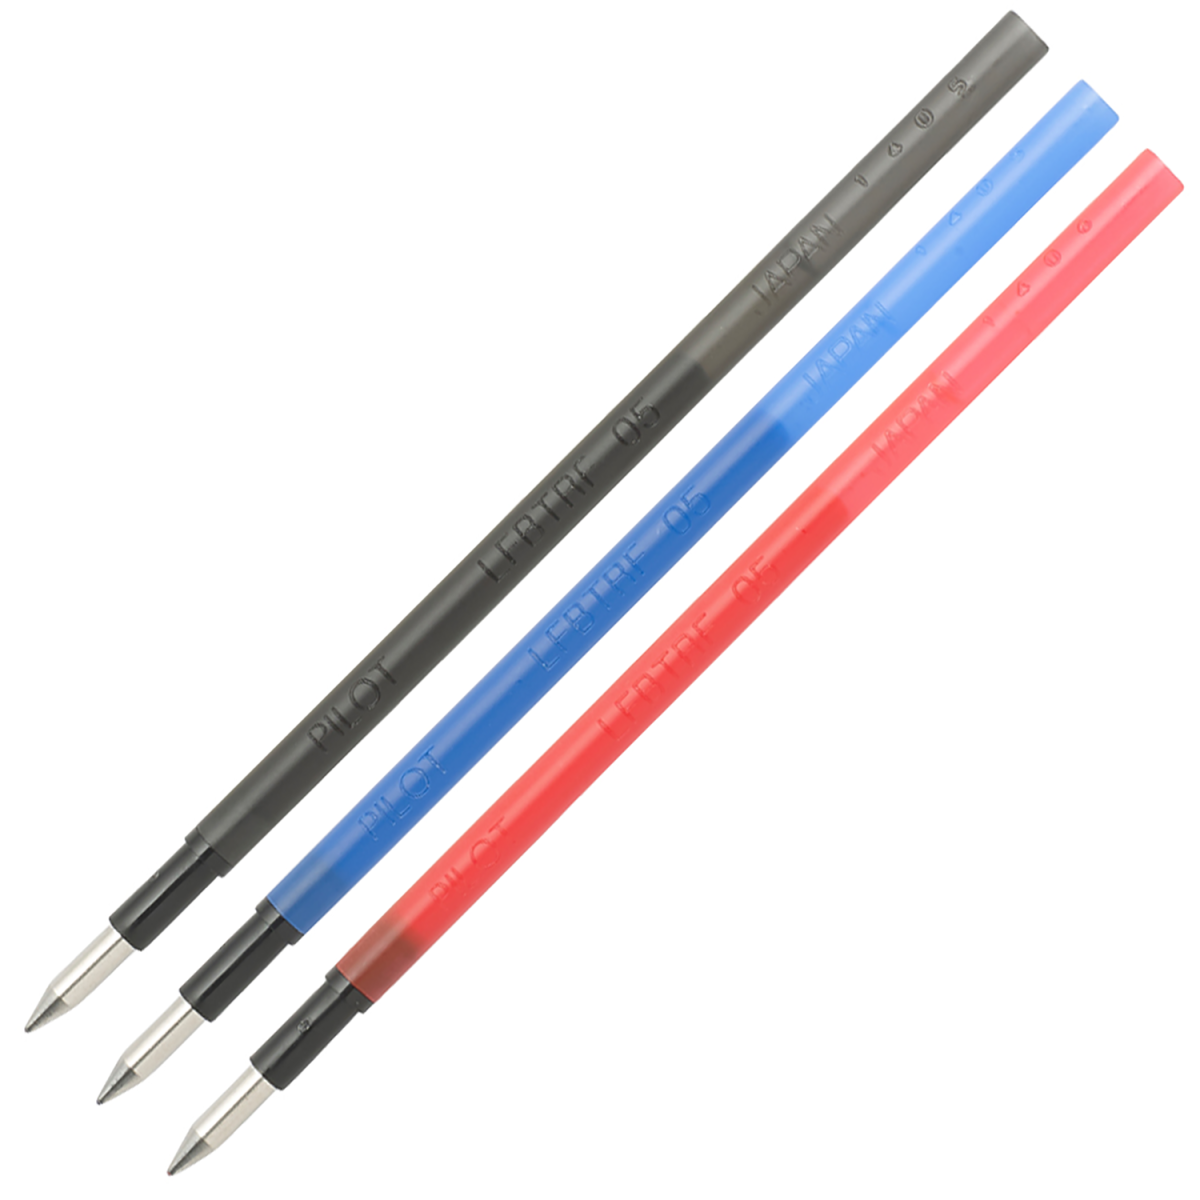 Refills for FriXion Erasable Multi-function Gel Pens in black, blue and red.